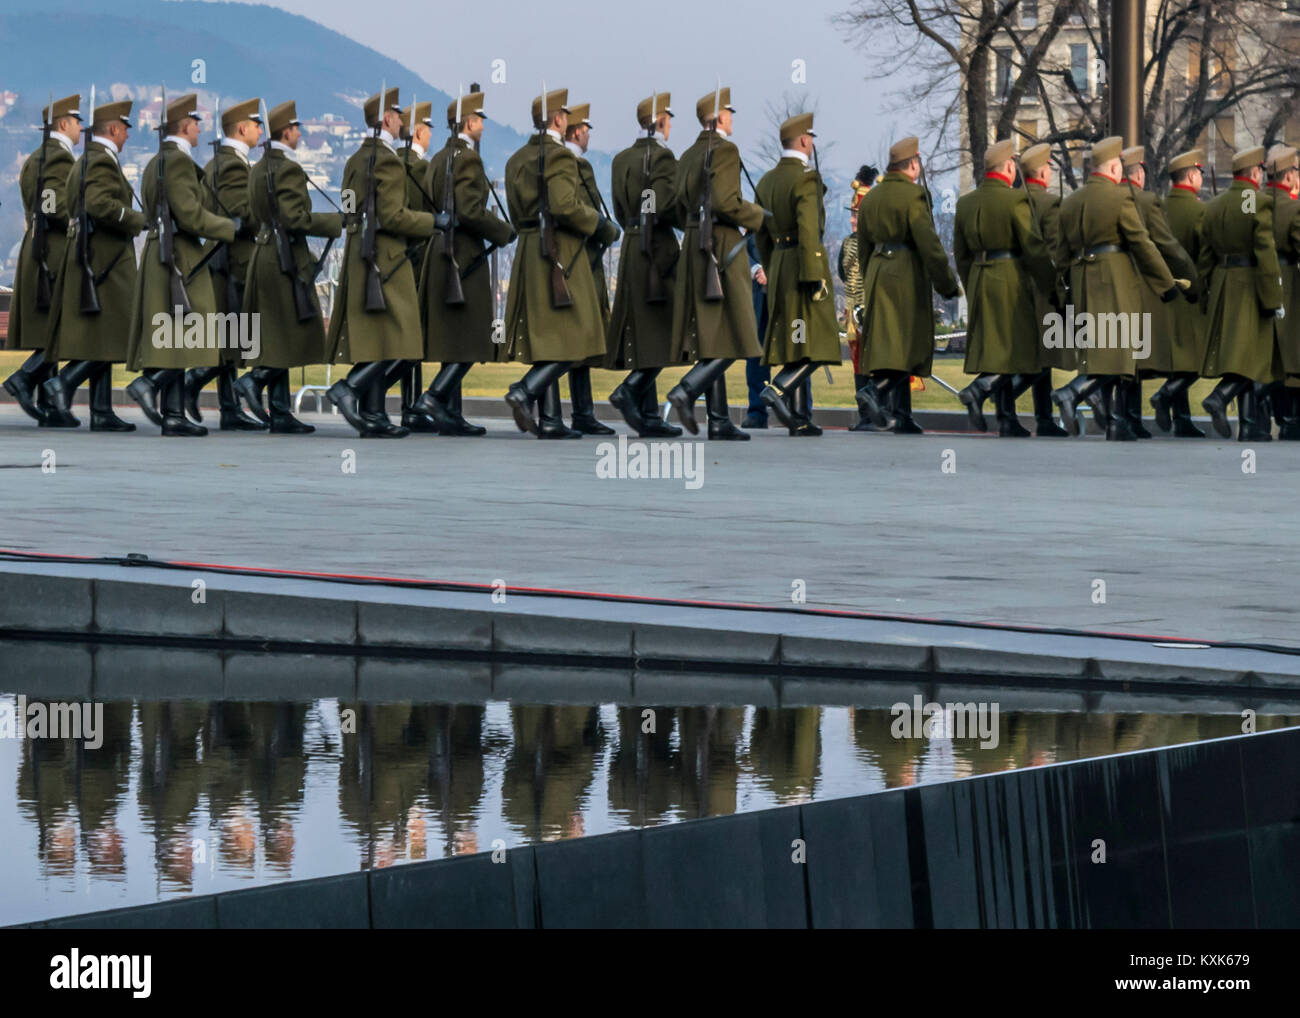 Soldiers march in front of the Parliament House during the 15 March military parade. Military parade on Hungarian National Holiday, Budapest, Hungary. Stock Photo